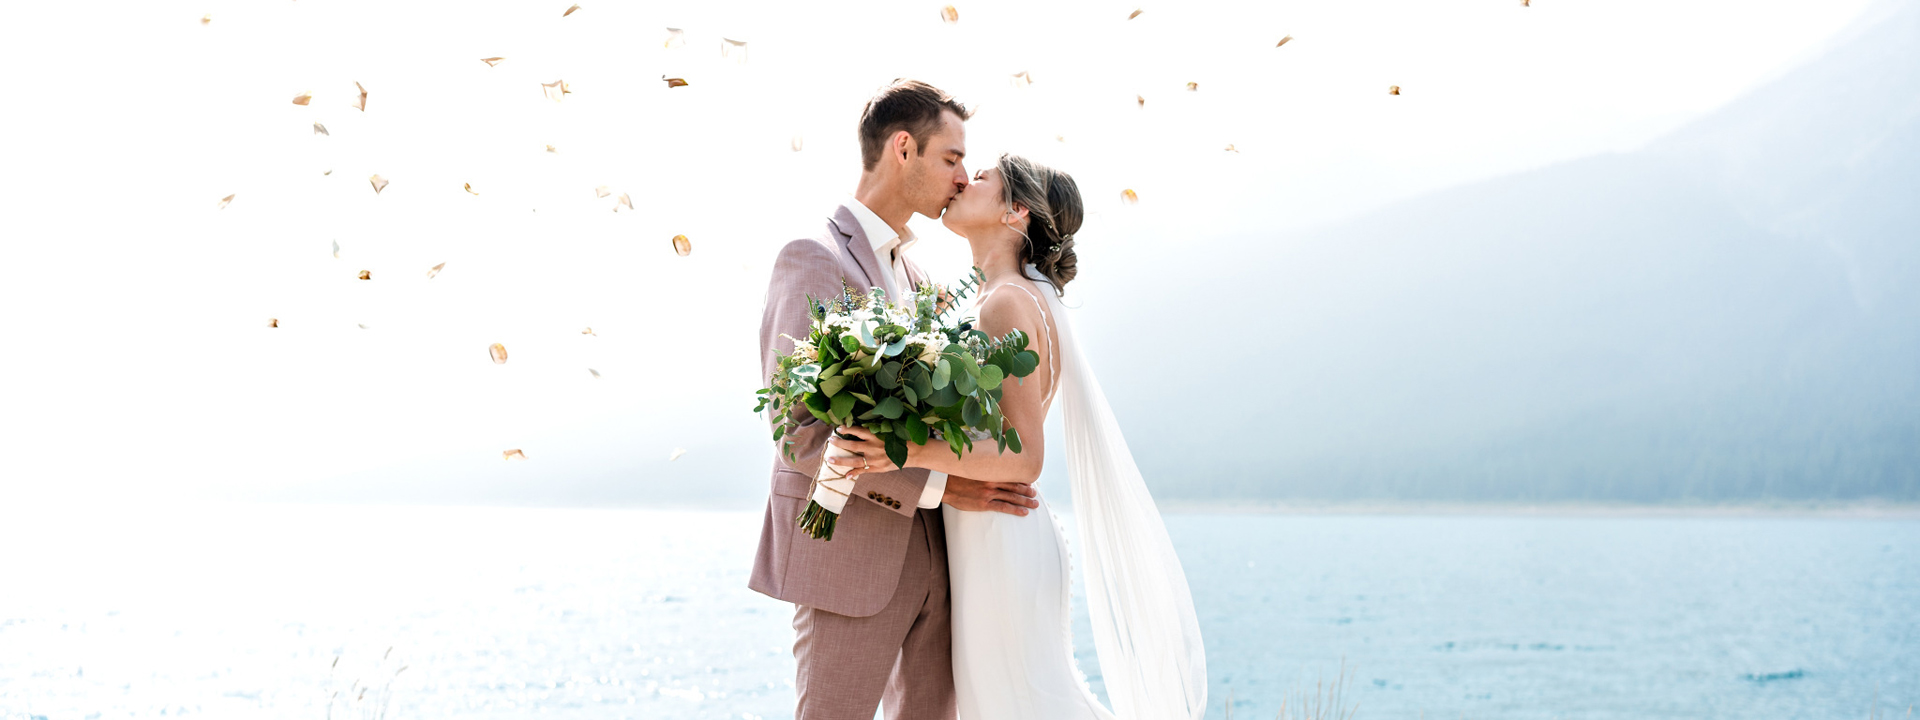 Bride and groom's first kiss after wedding ceremony in Banff | 4Eyes Photography